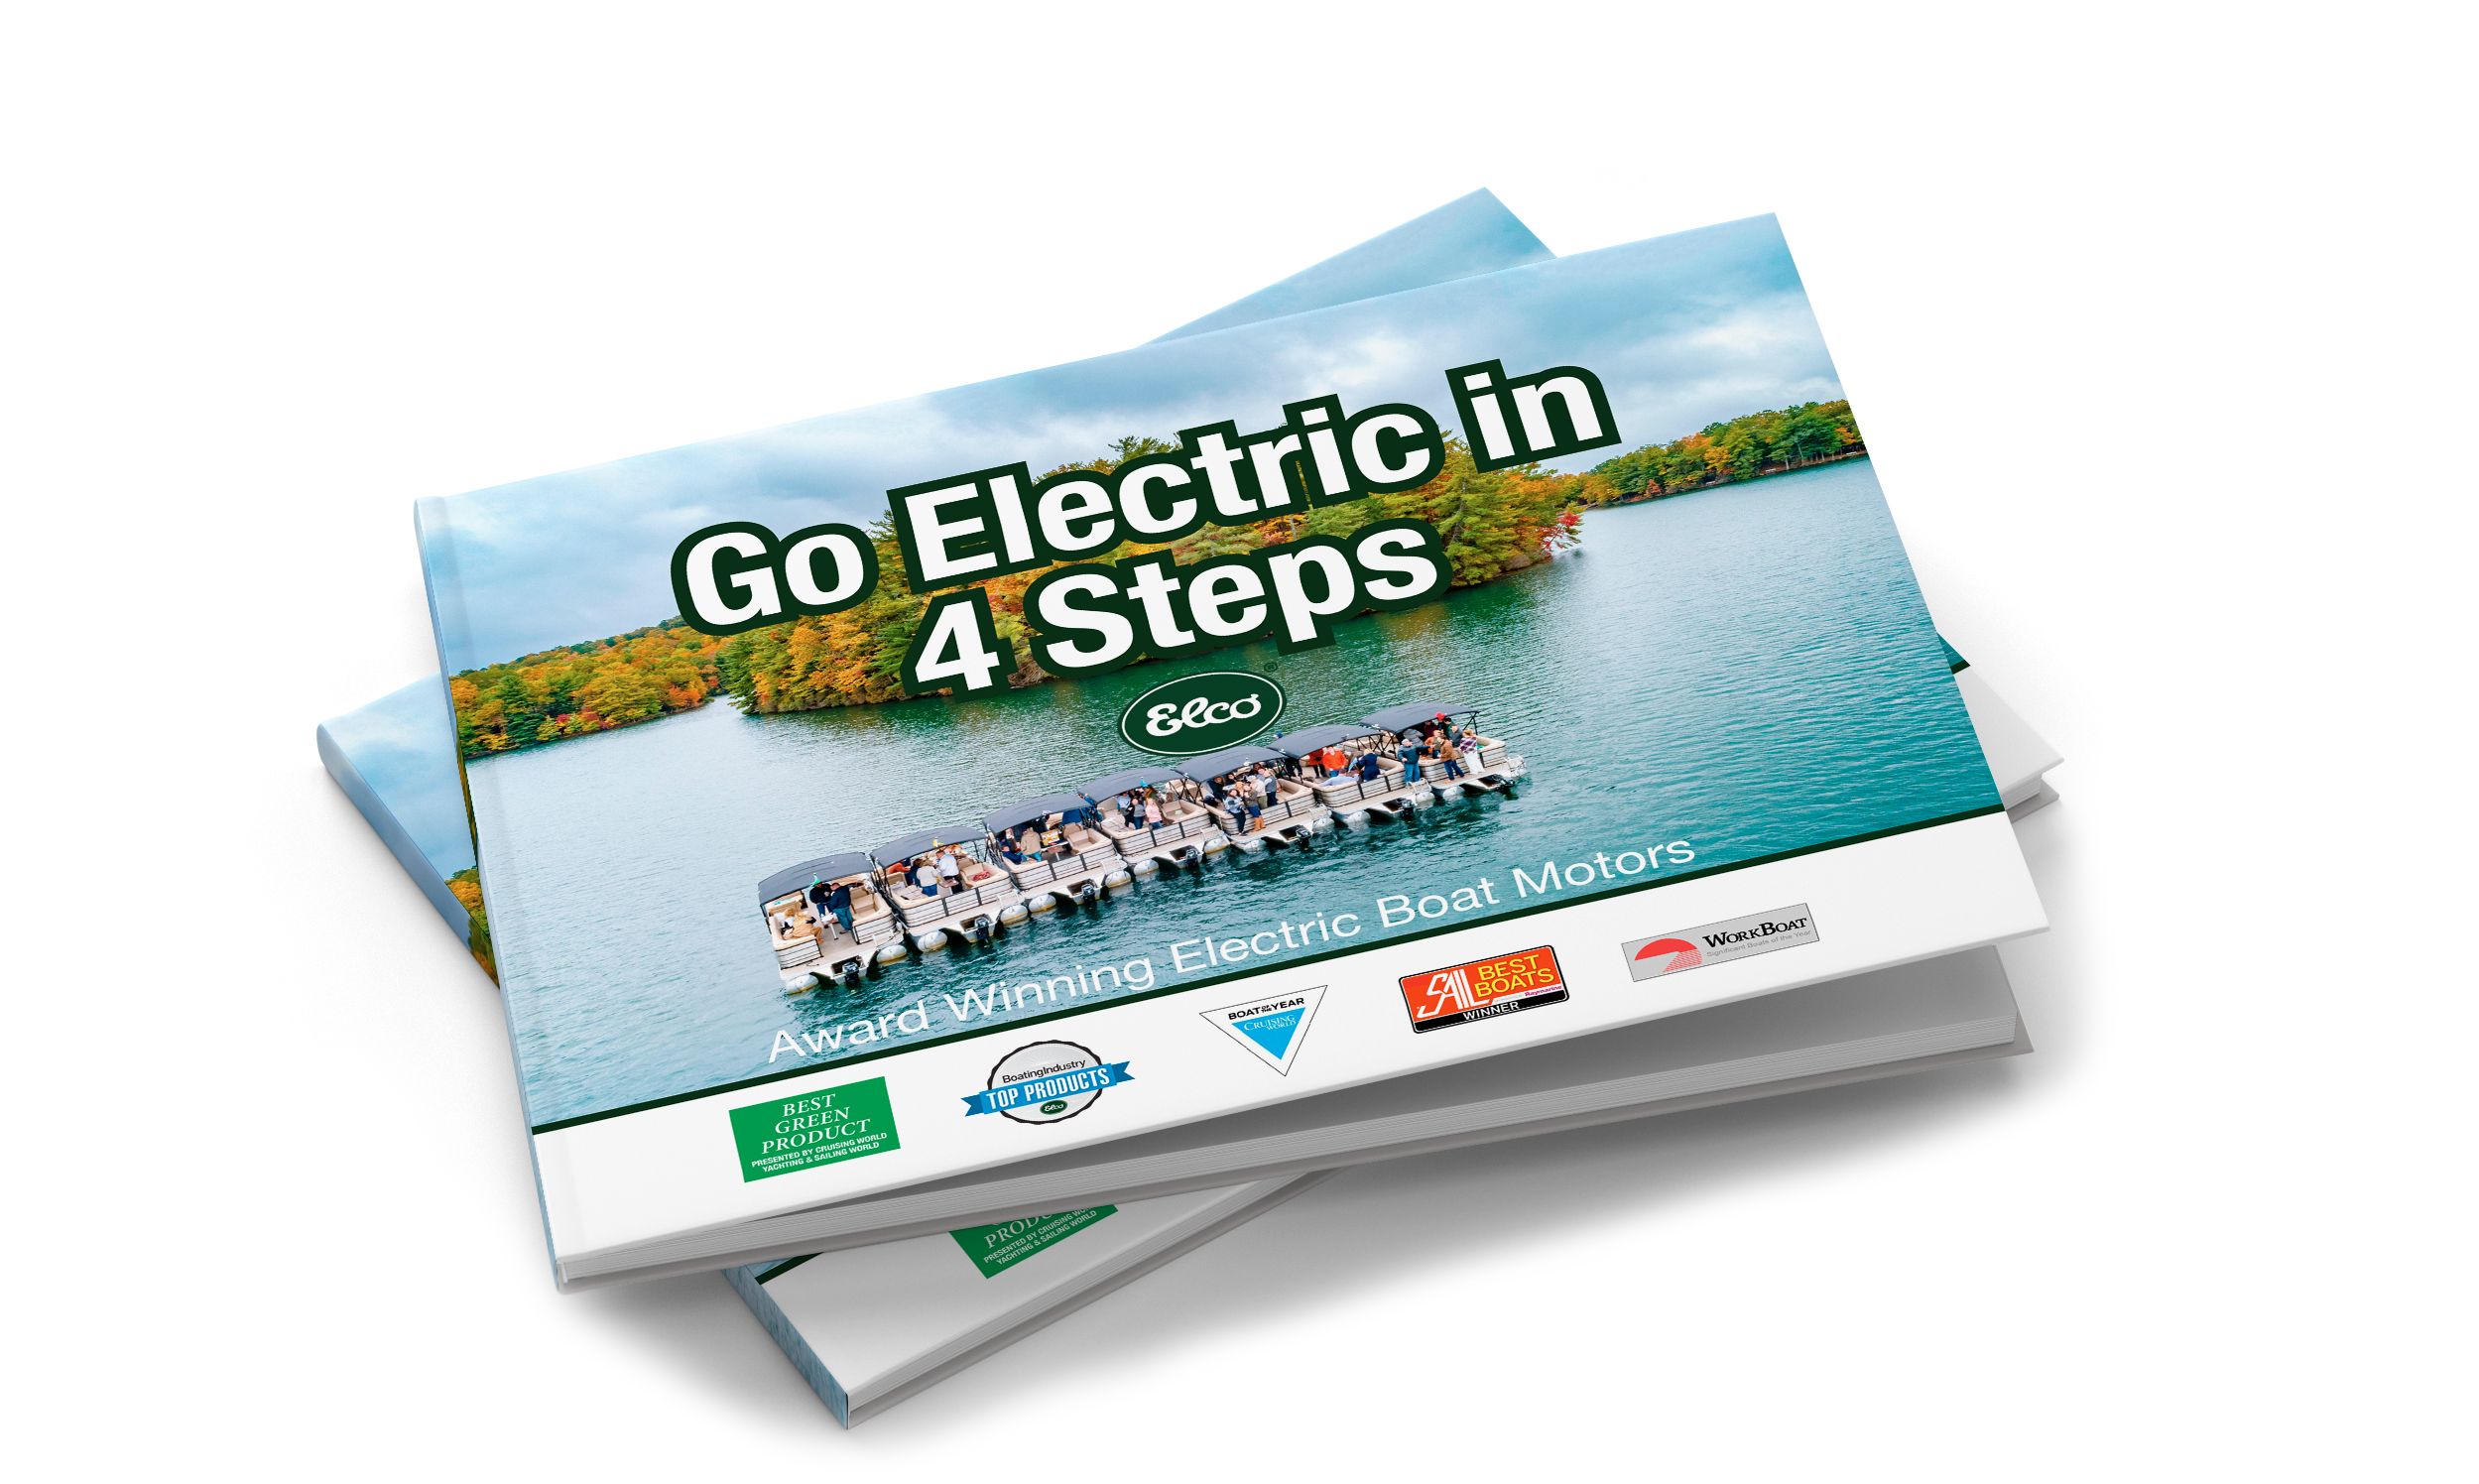 Go Electric in 4 Steps Ebook - electric outboard motor